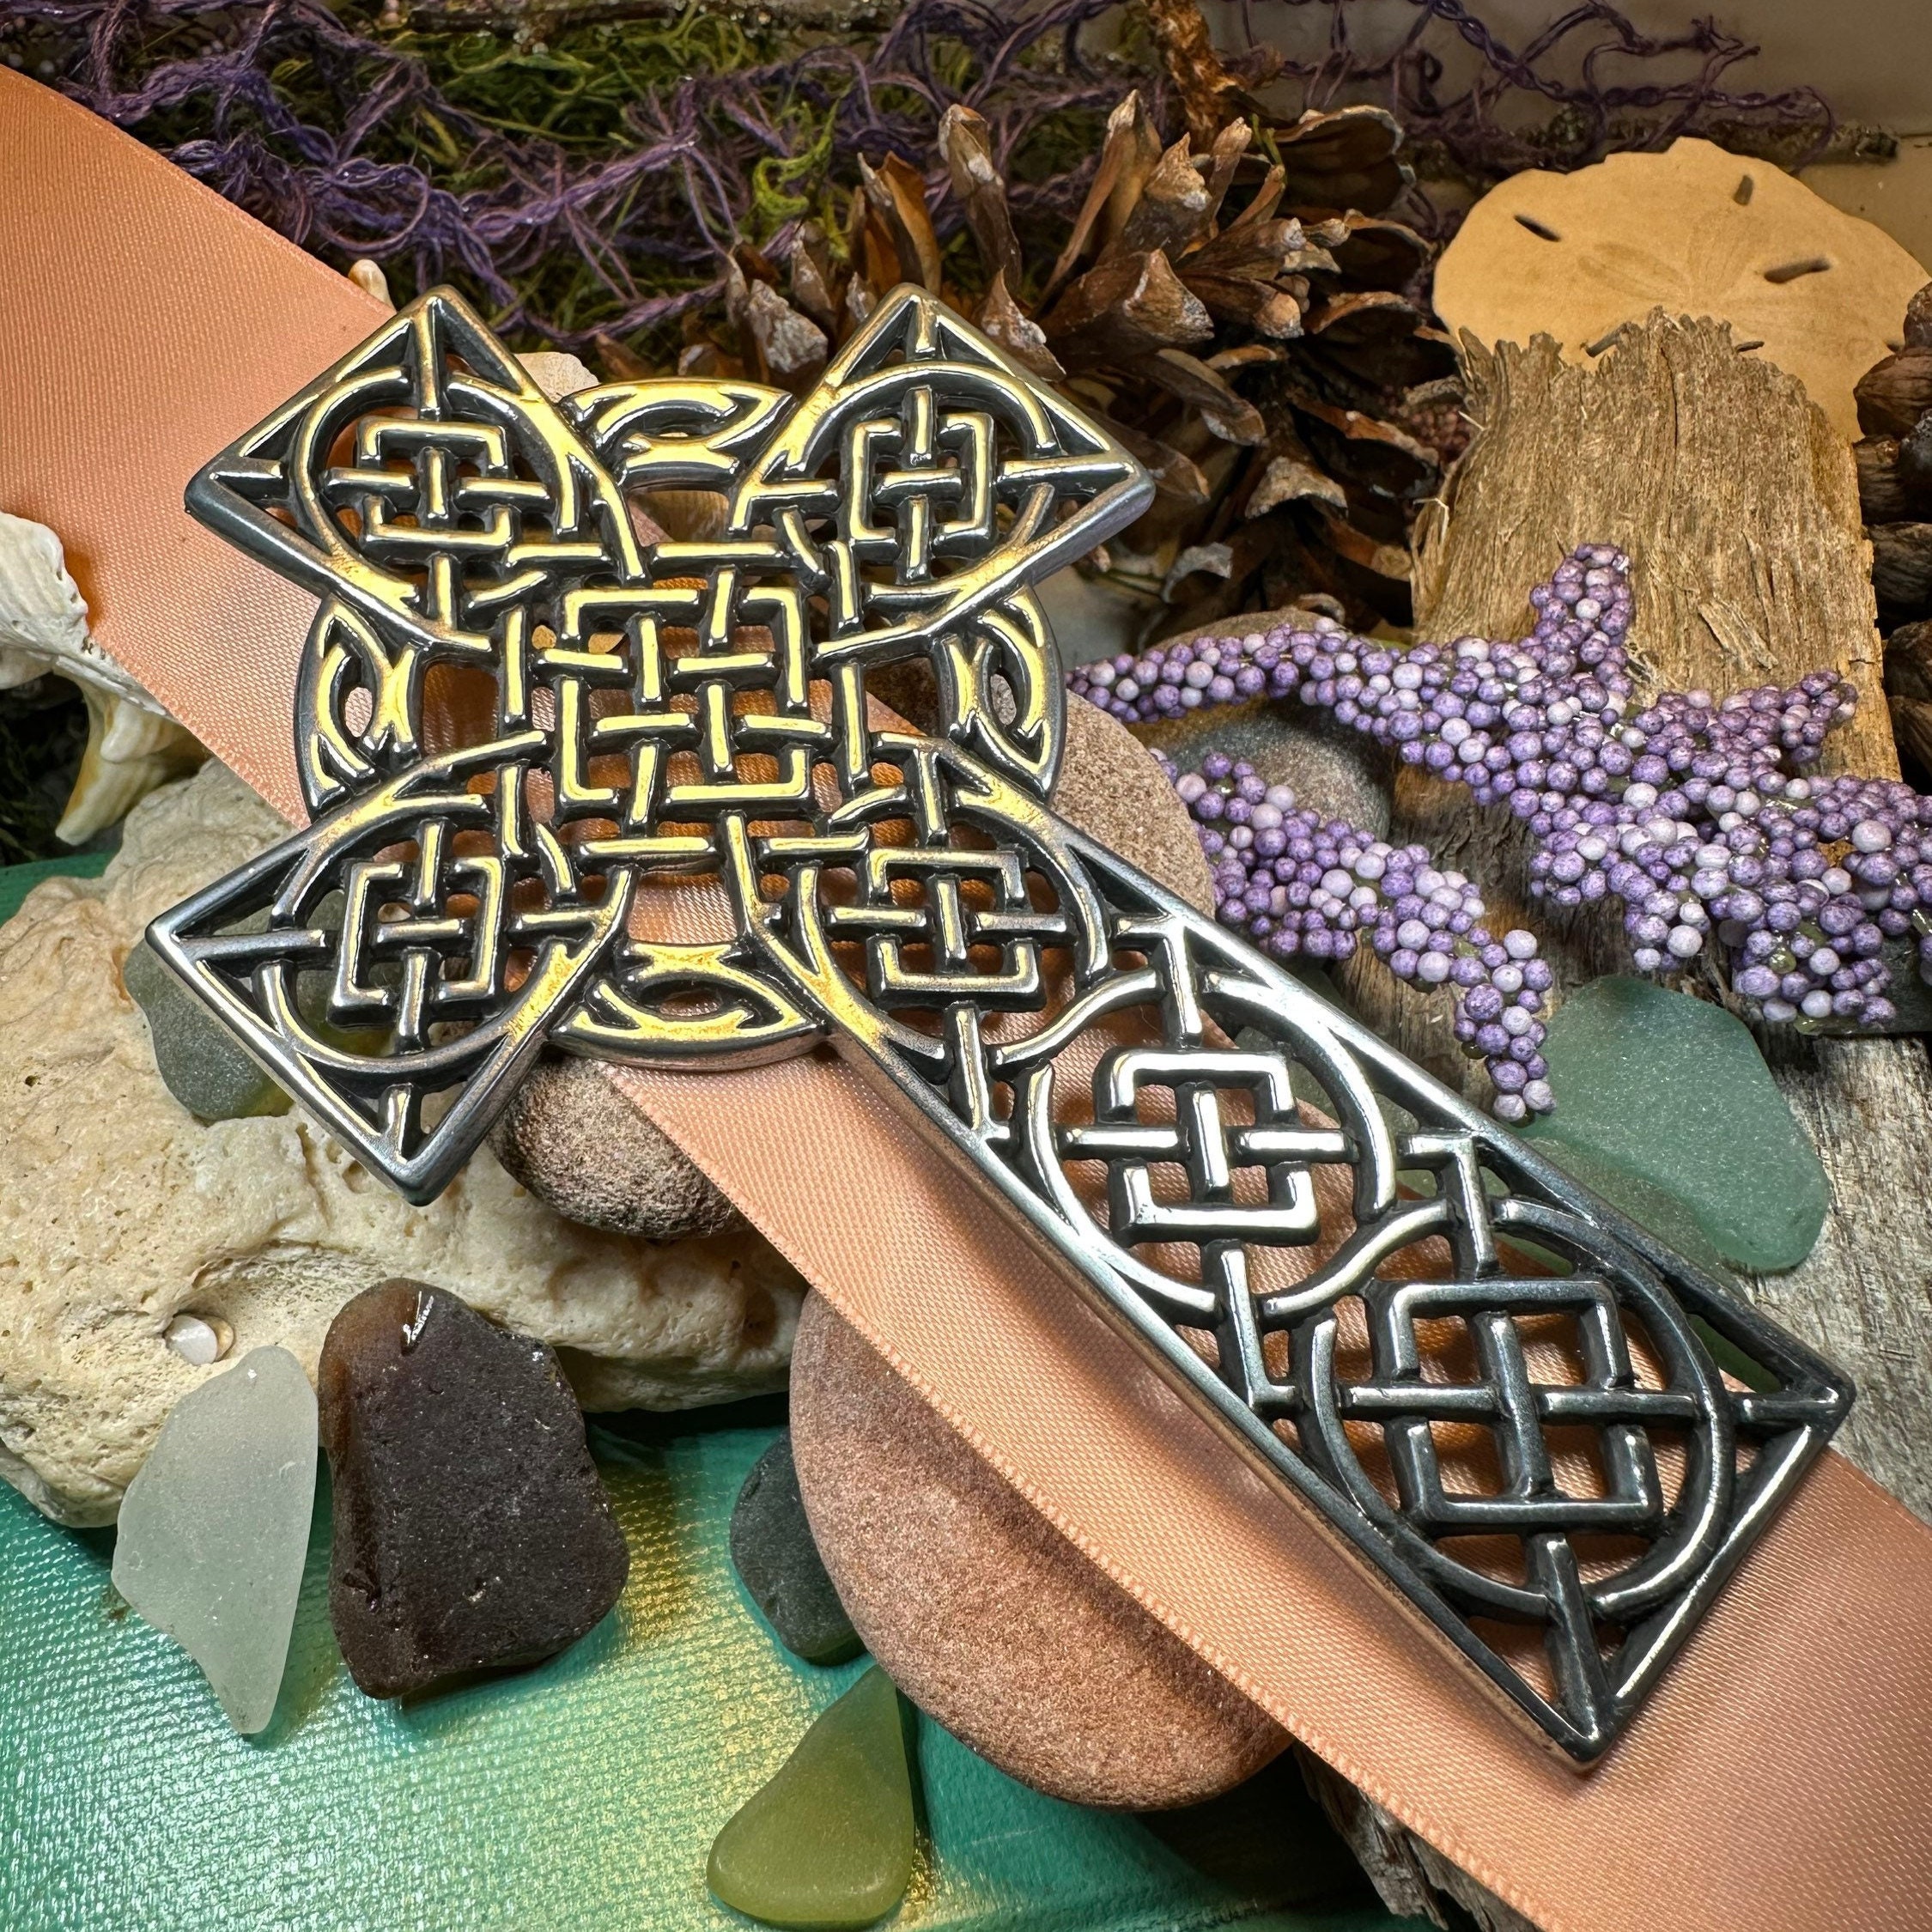 Celtic Cross Patch, Religious Ethnic Emblem, Embroidered Iron-on